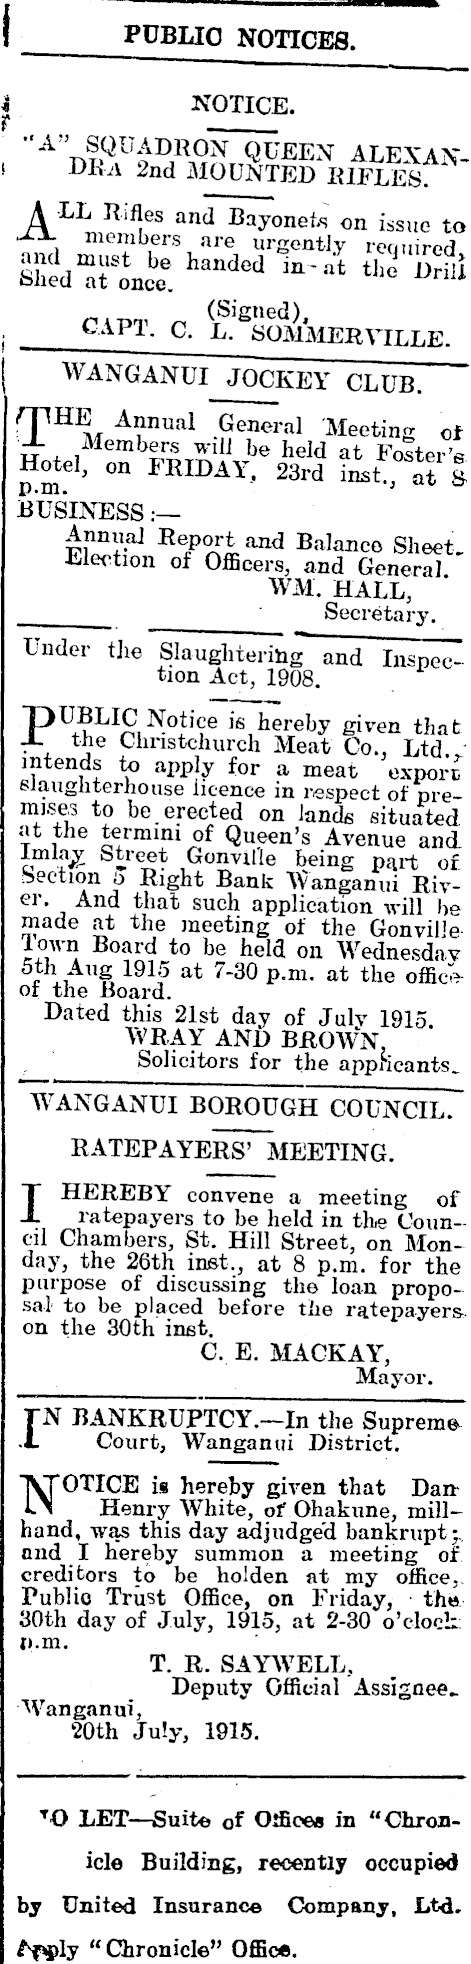 Papers Past Newspapers Wanganui Chronicle 22 July 1915 Page 7 Advertisements Column 6